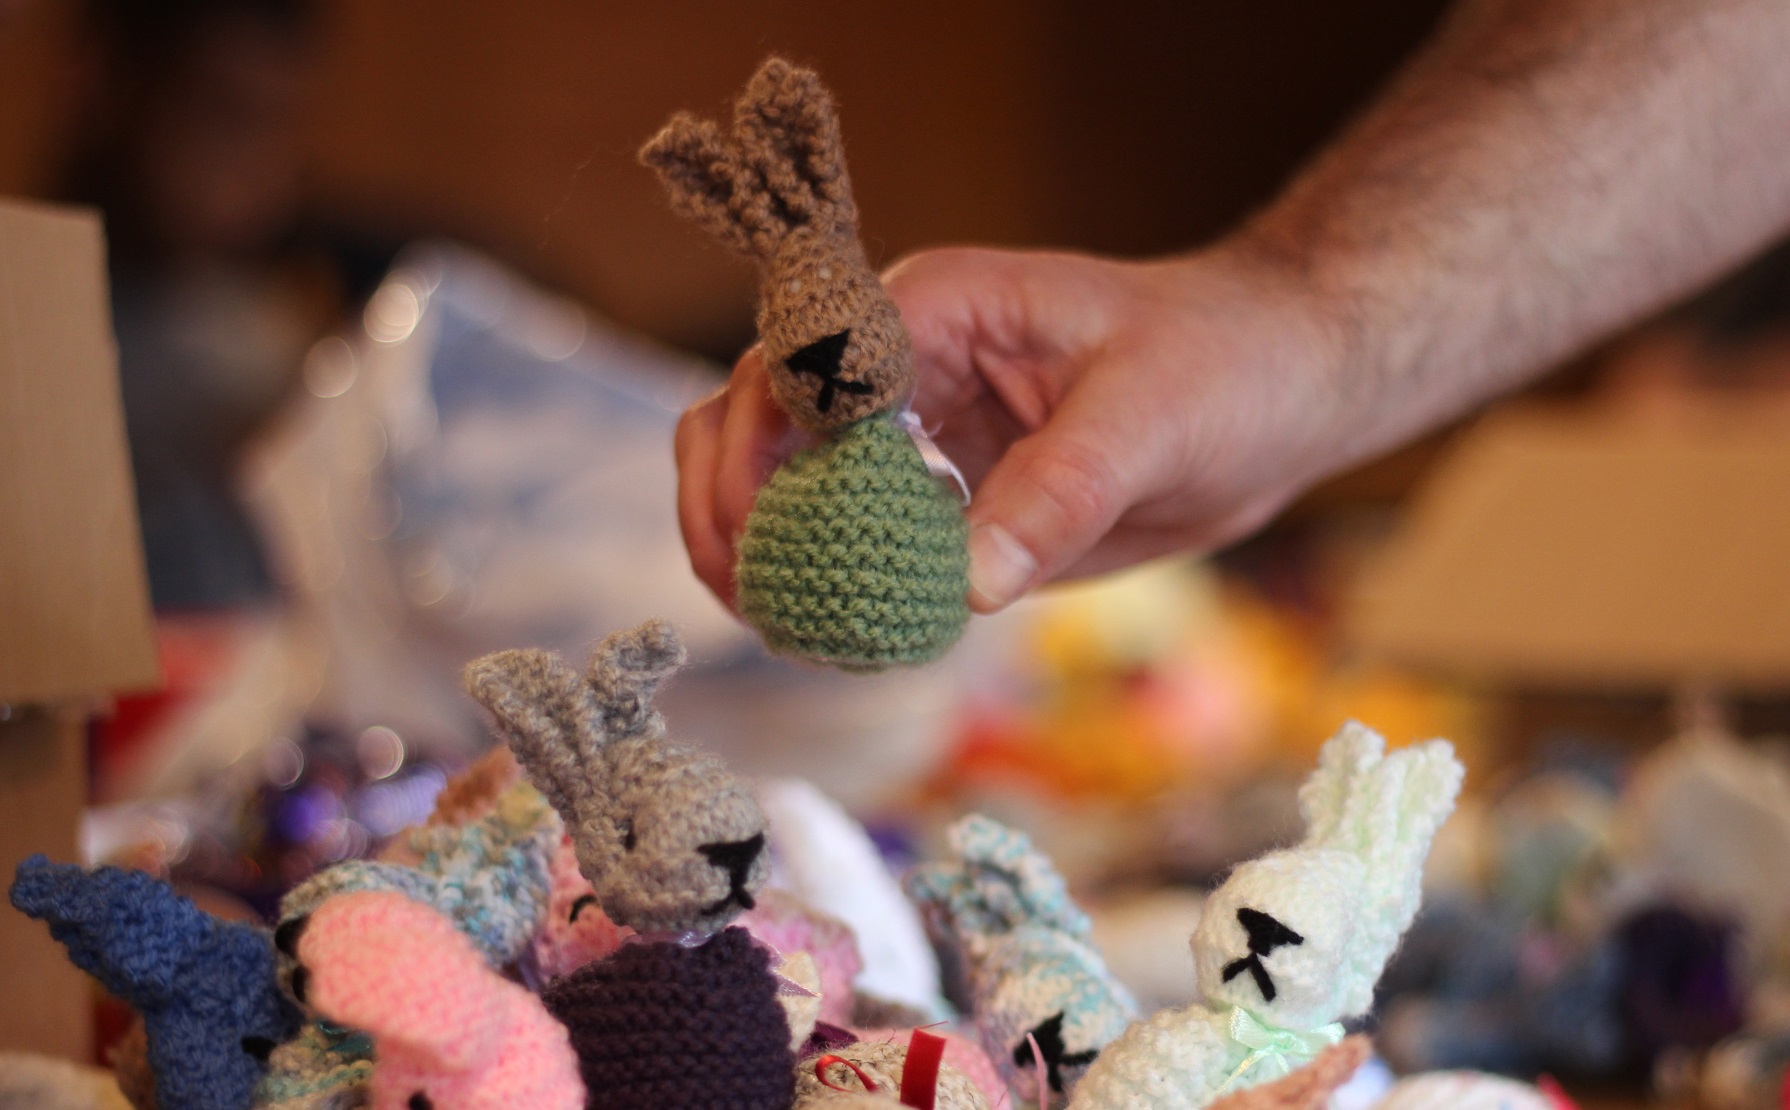 Hand places down knitted bunny in pile